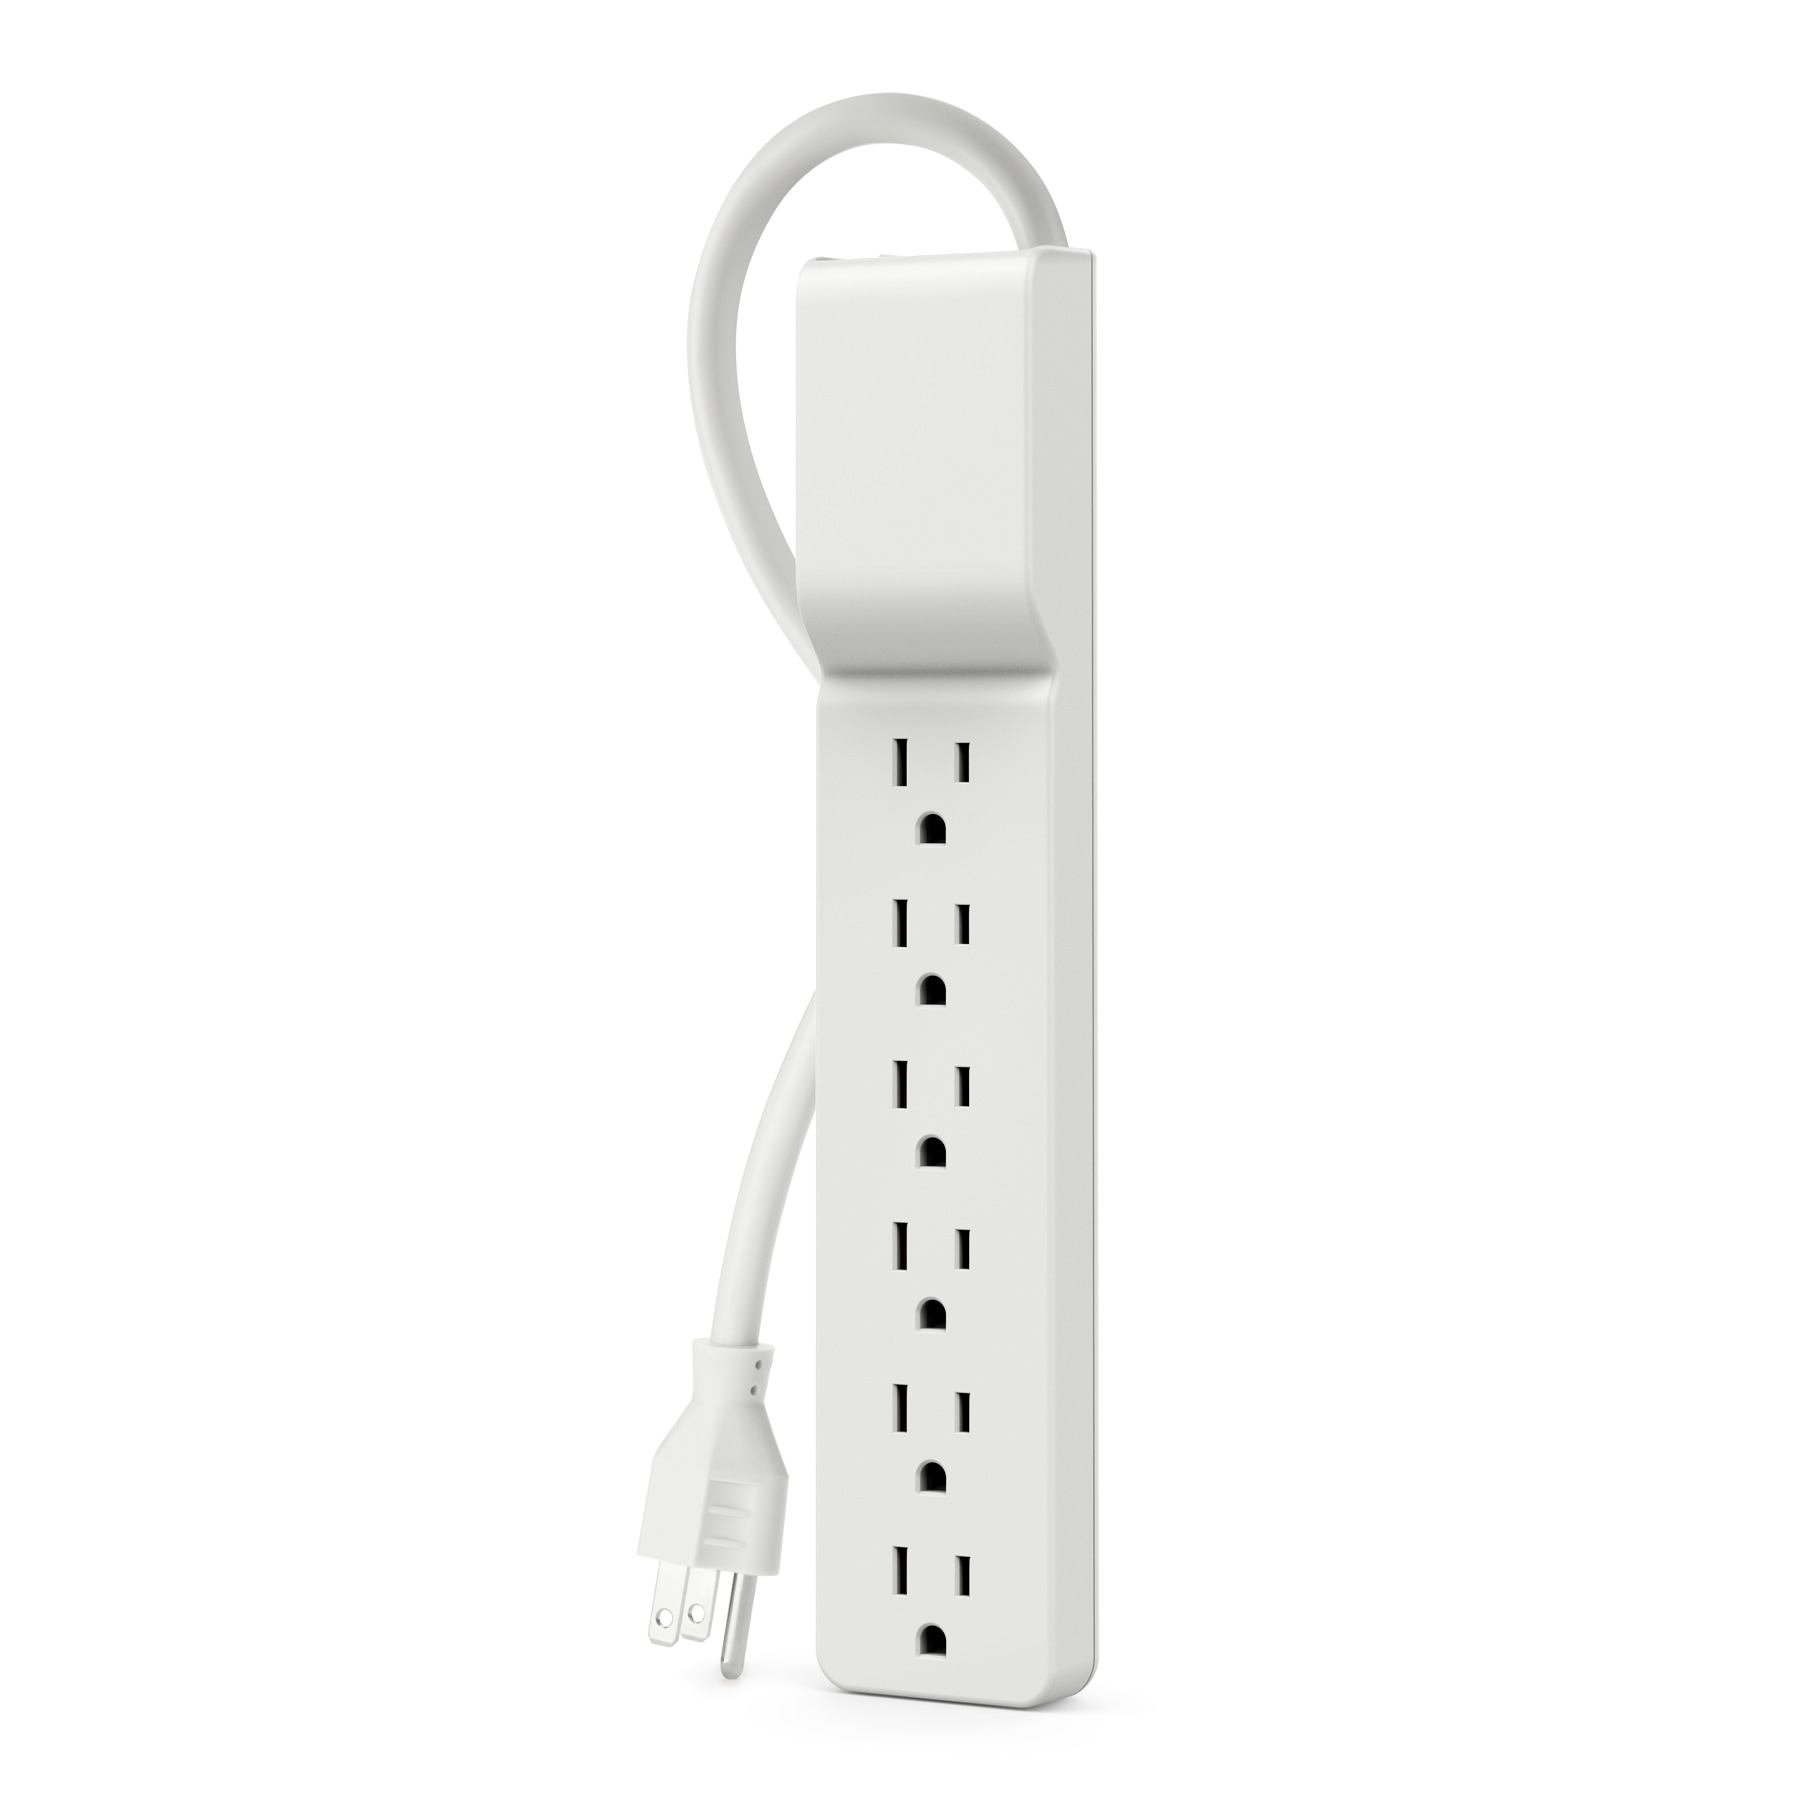 Belkin 6-Outlet Surge Protector - 10ft Cord - Straight Plug - 720J - White